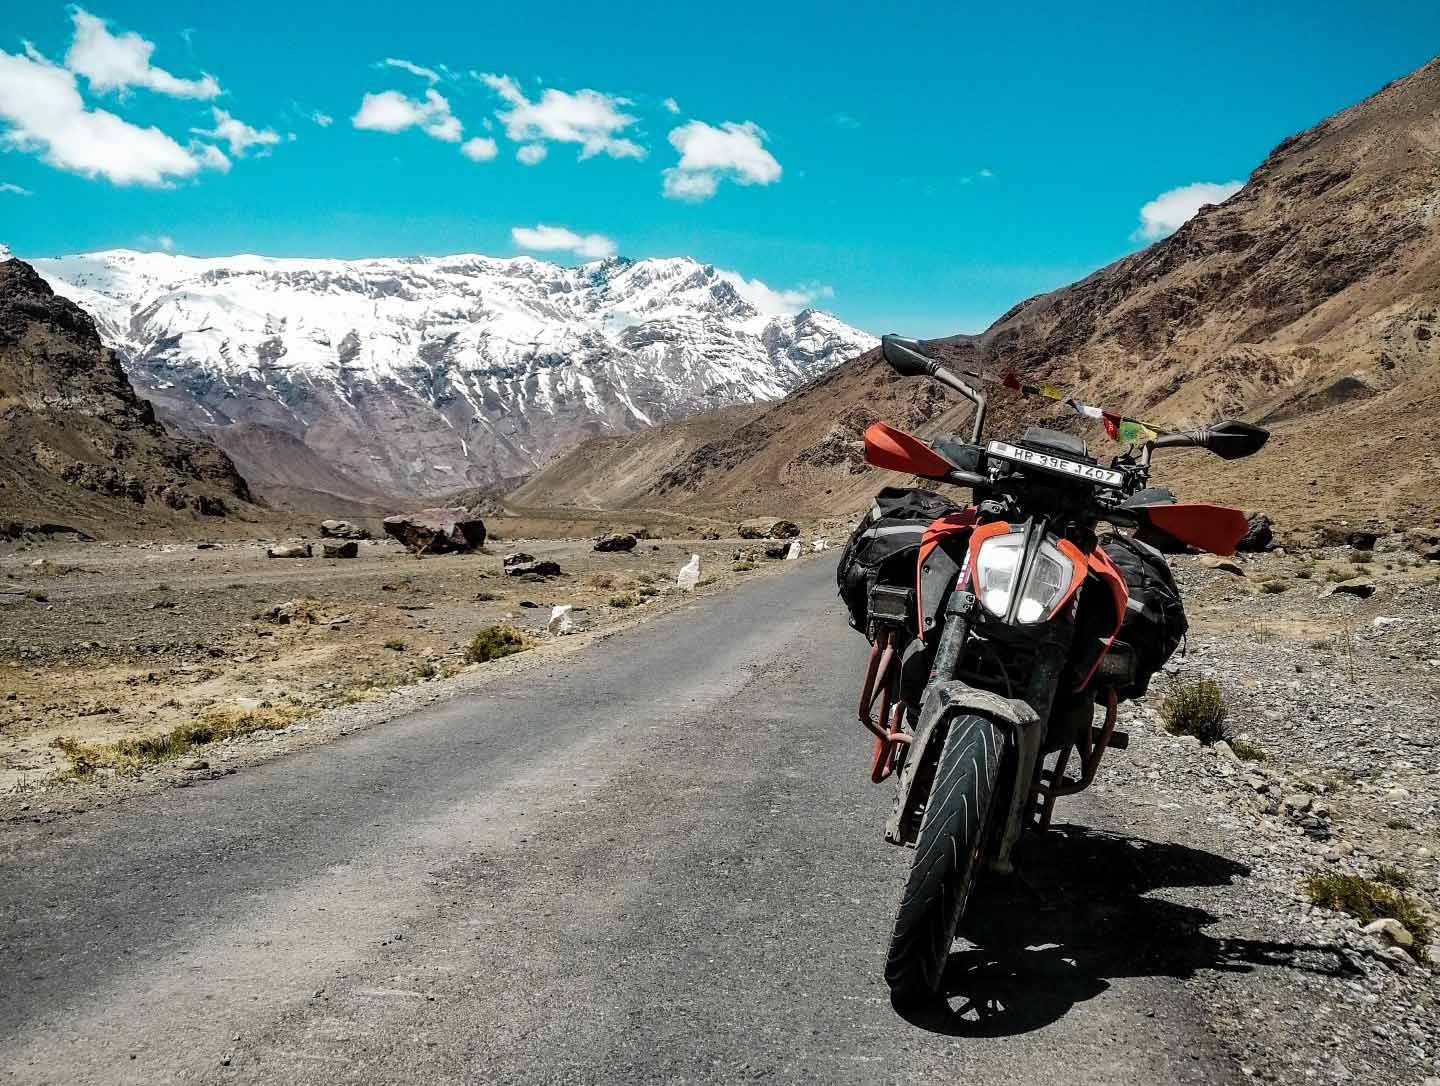 Northern India in the Himalayas on a KTM Duke.